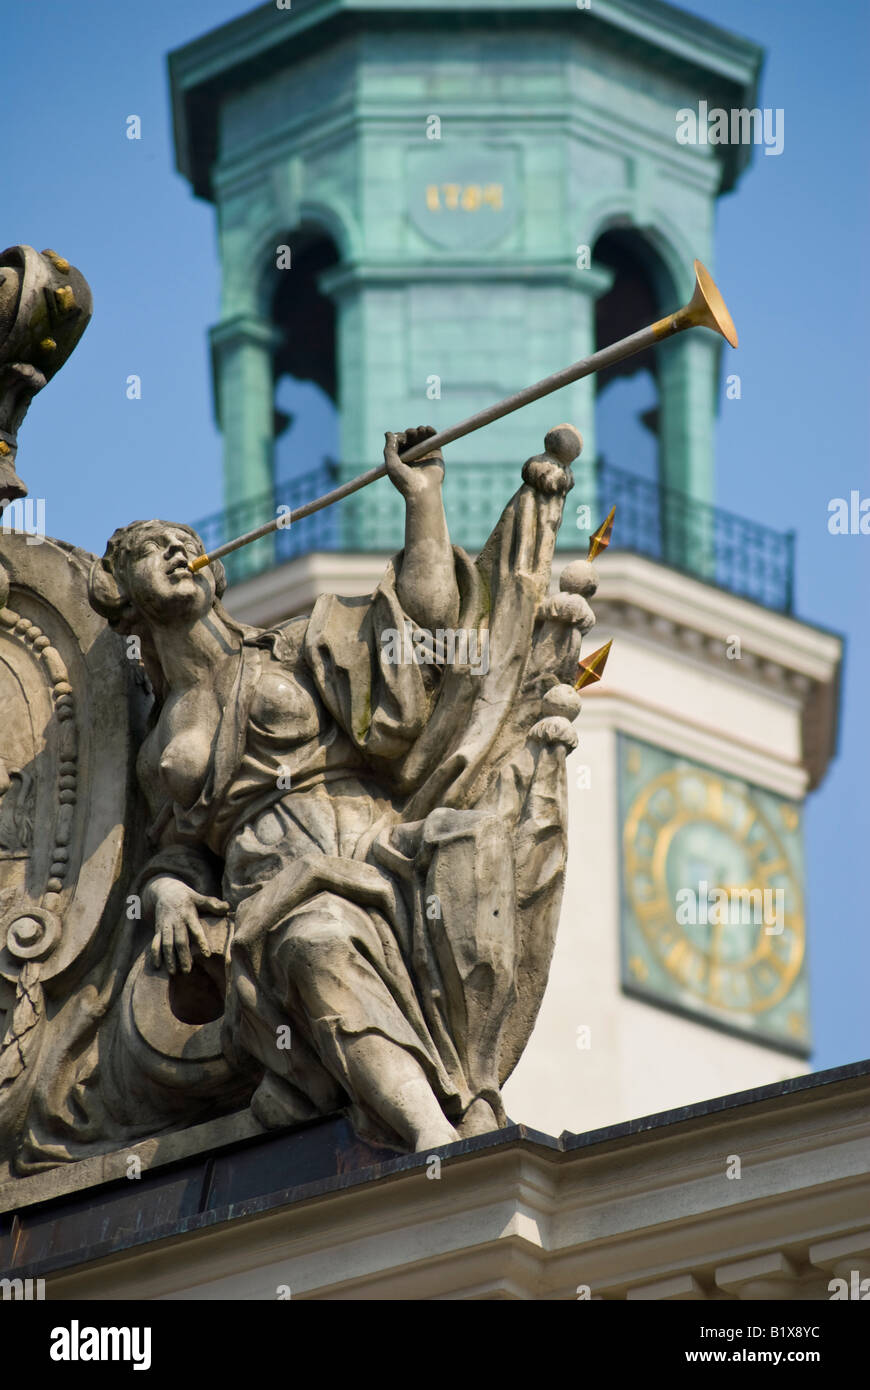 Poznan, Wielkopolaska, Poland. Stary Rynek (Old Market Square) Statue: Woman with Trumpet Town Hall Tower behind Stock Photo